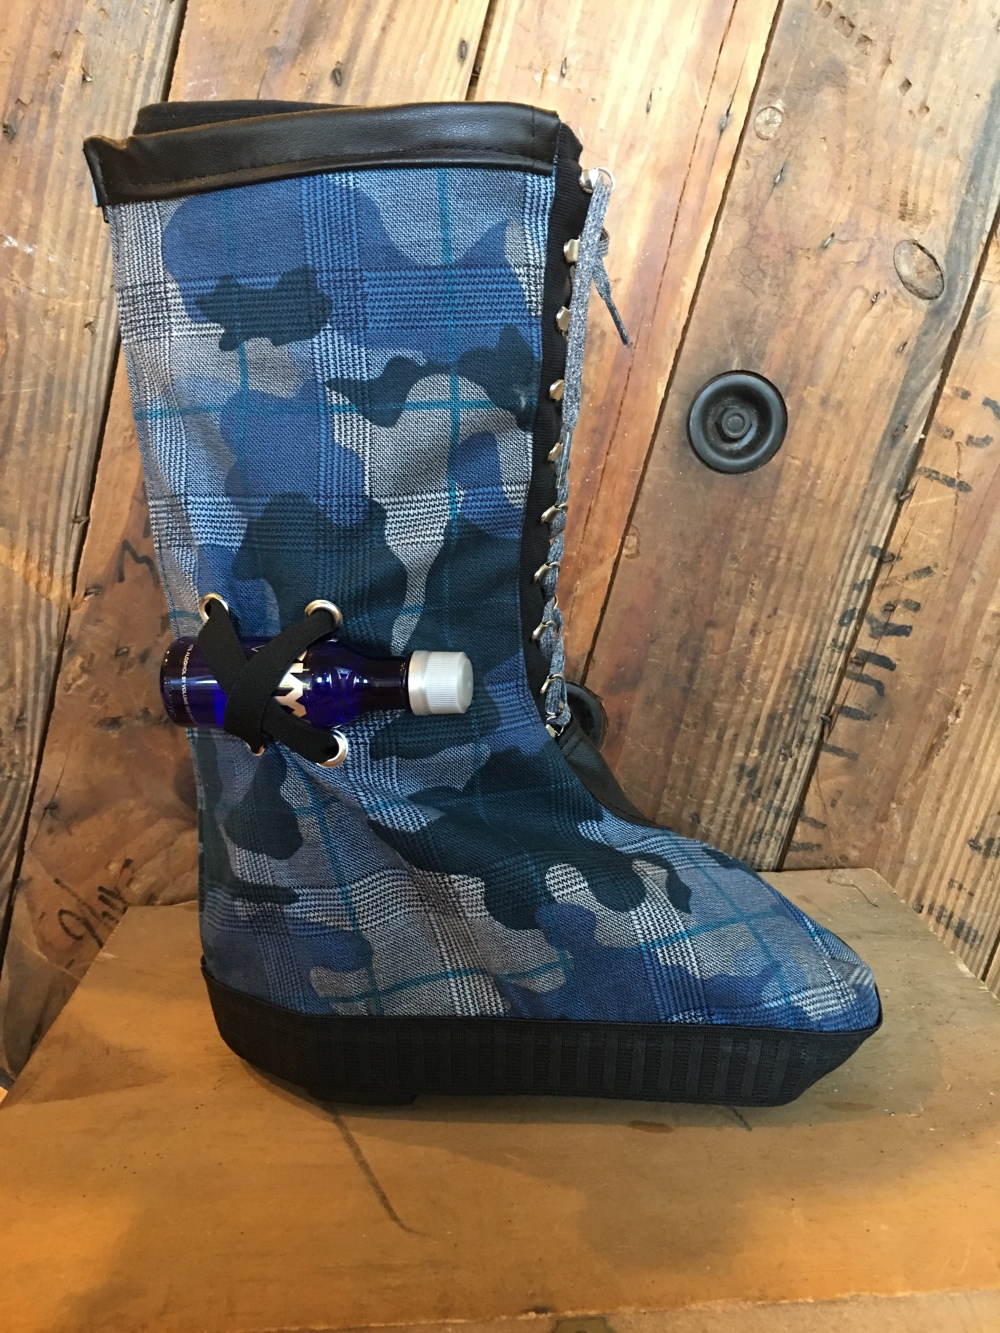 We will work with you if you need a custom medical boot cover